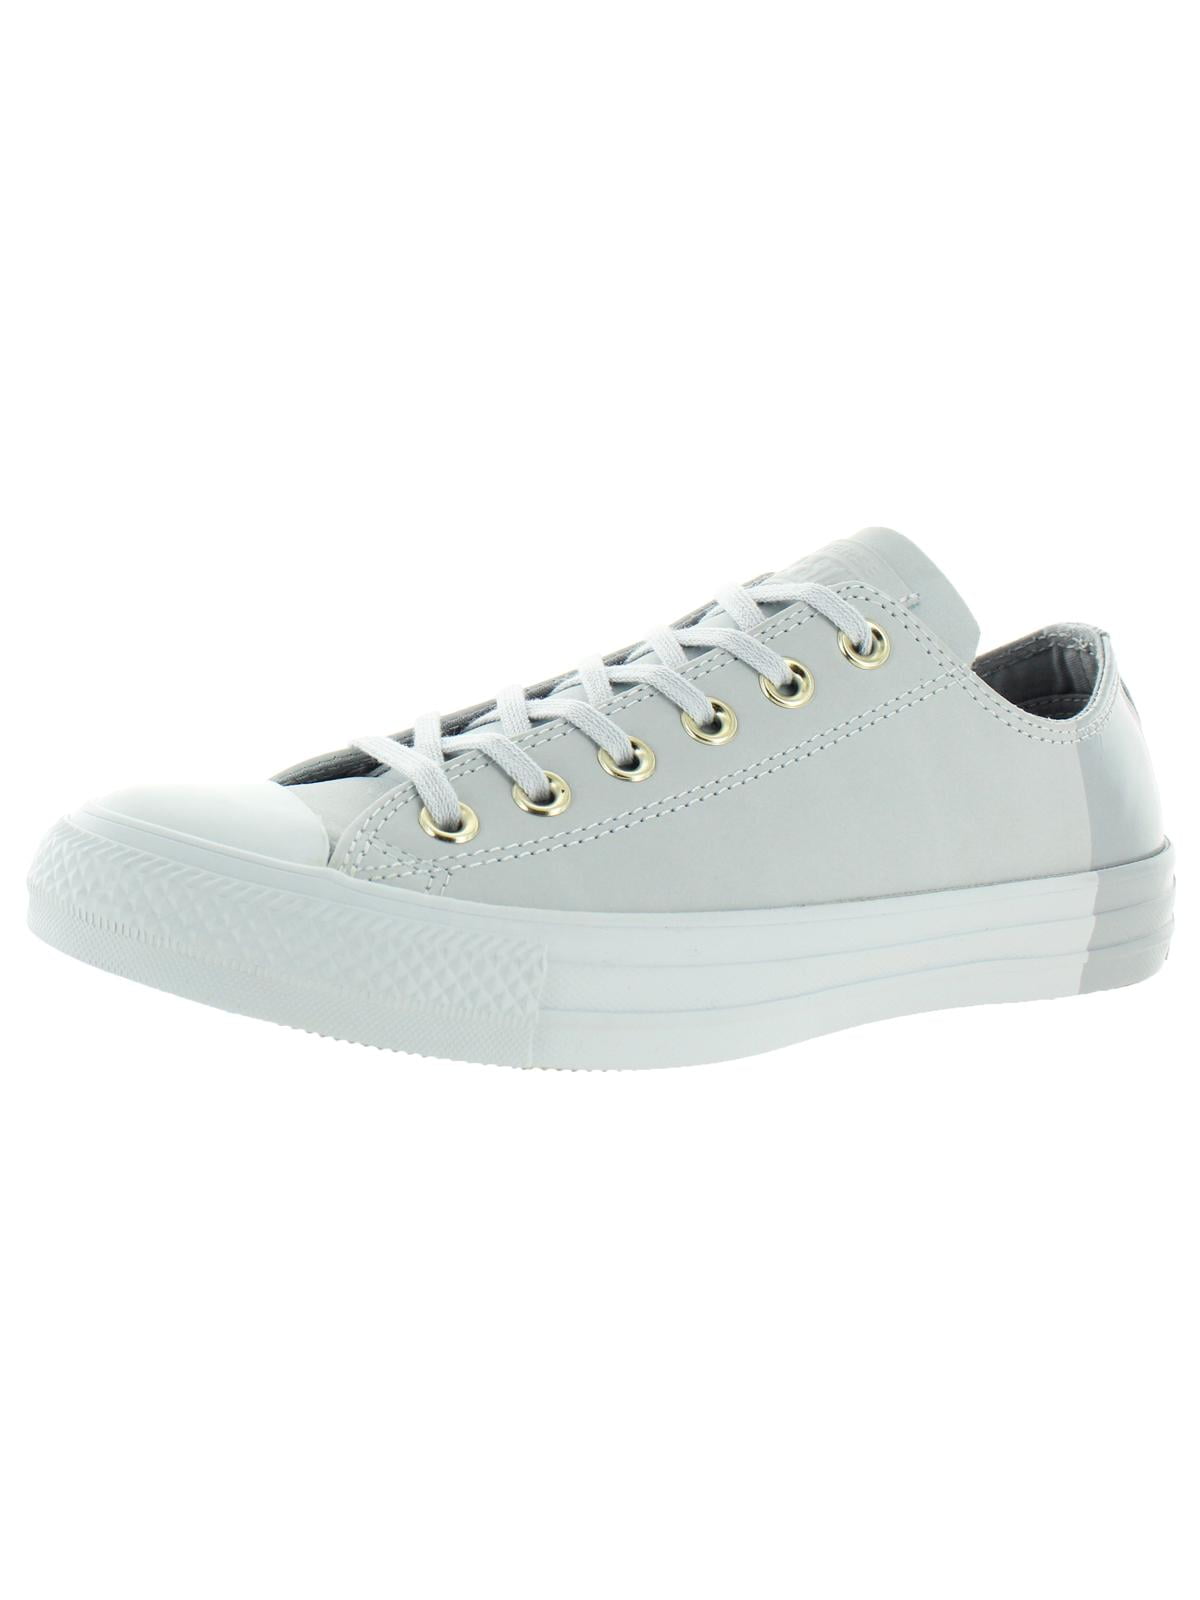 converse ox leather womens trainers